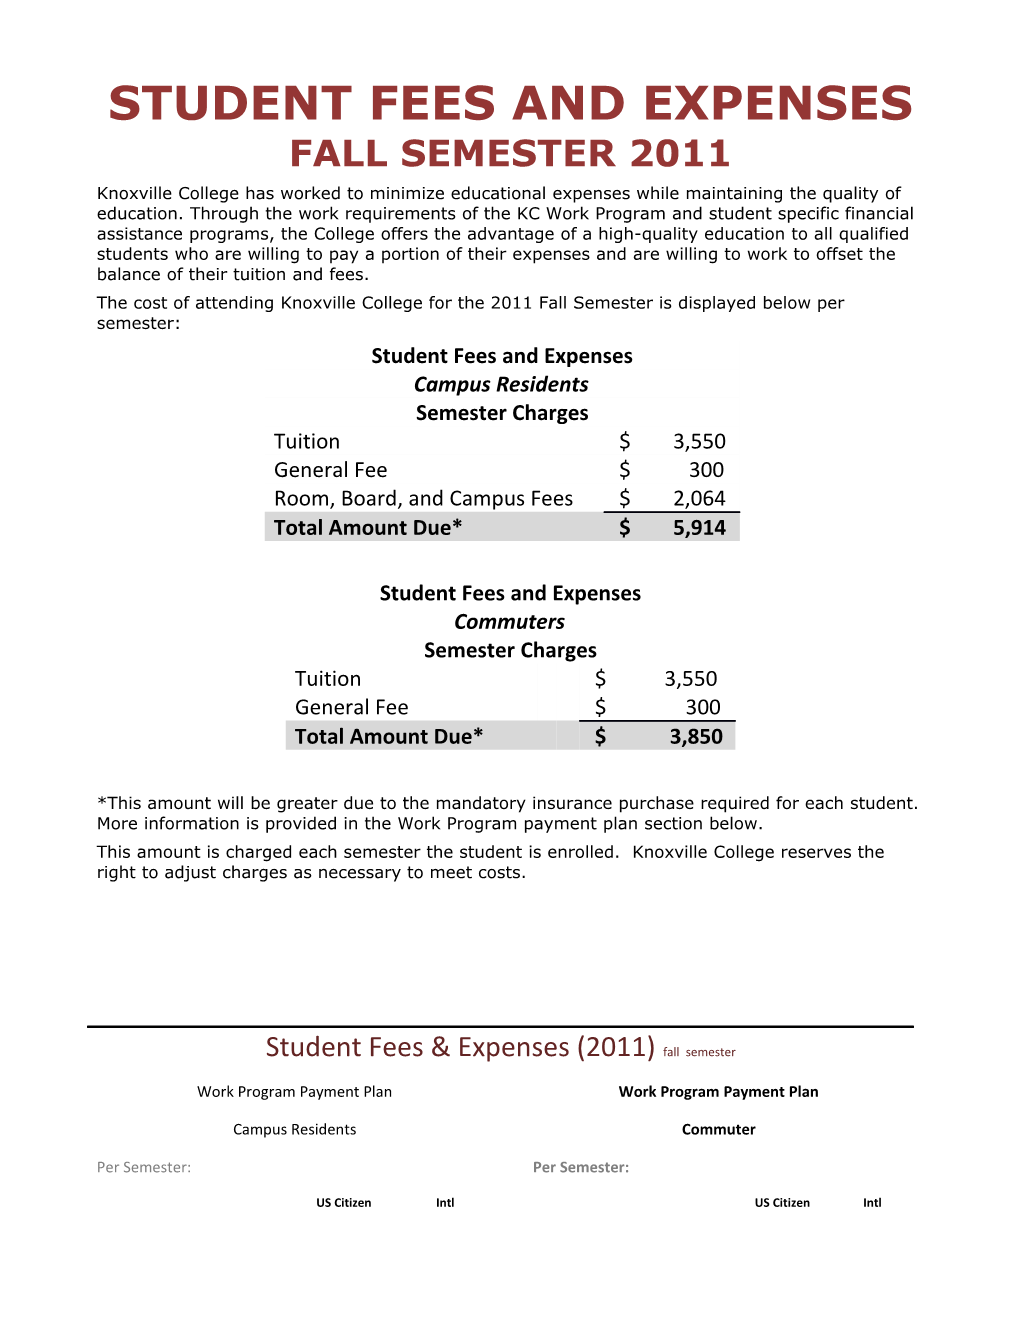 Student Fees and Expenses